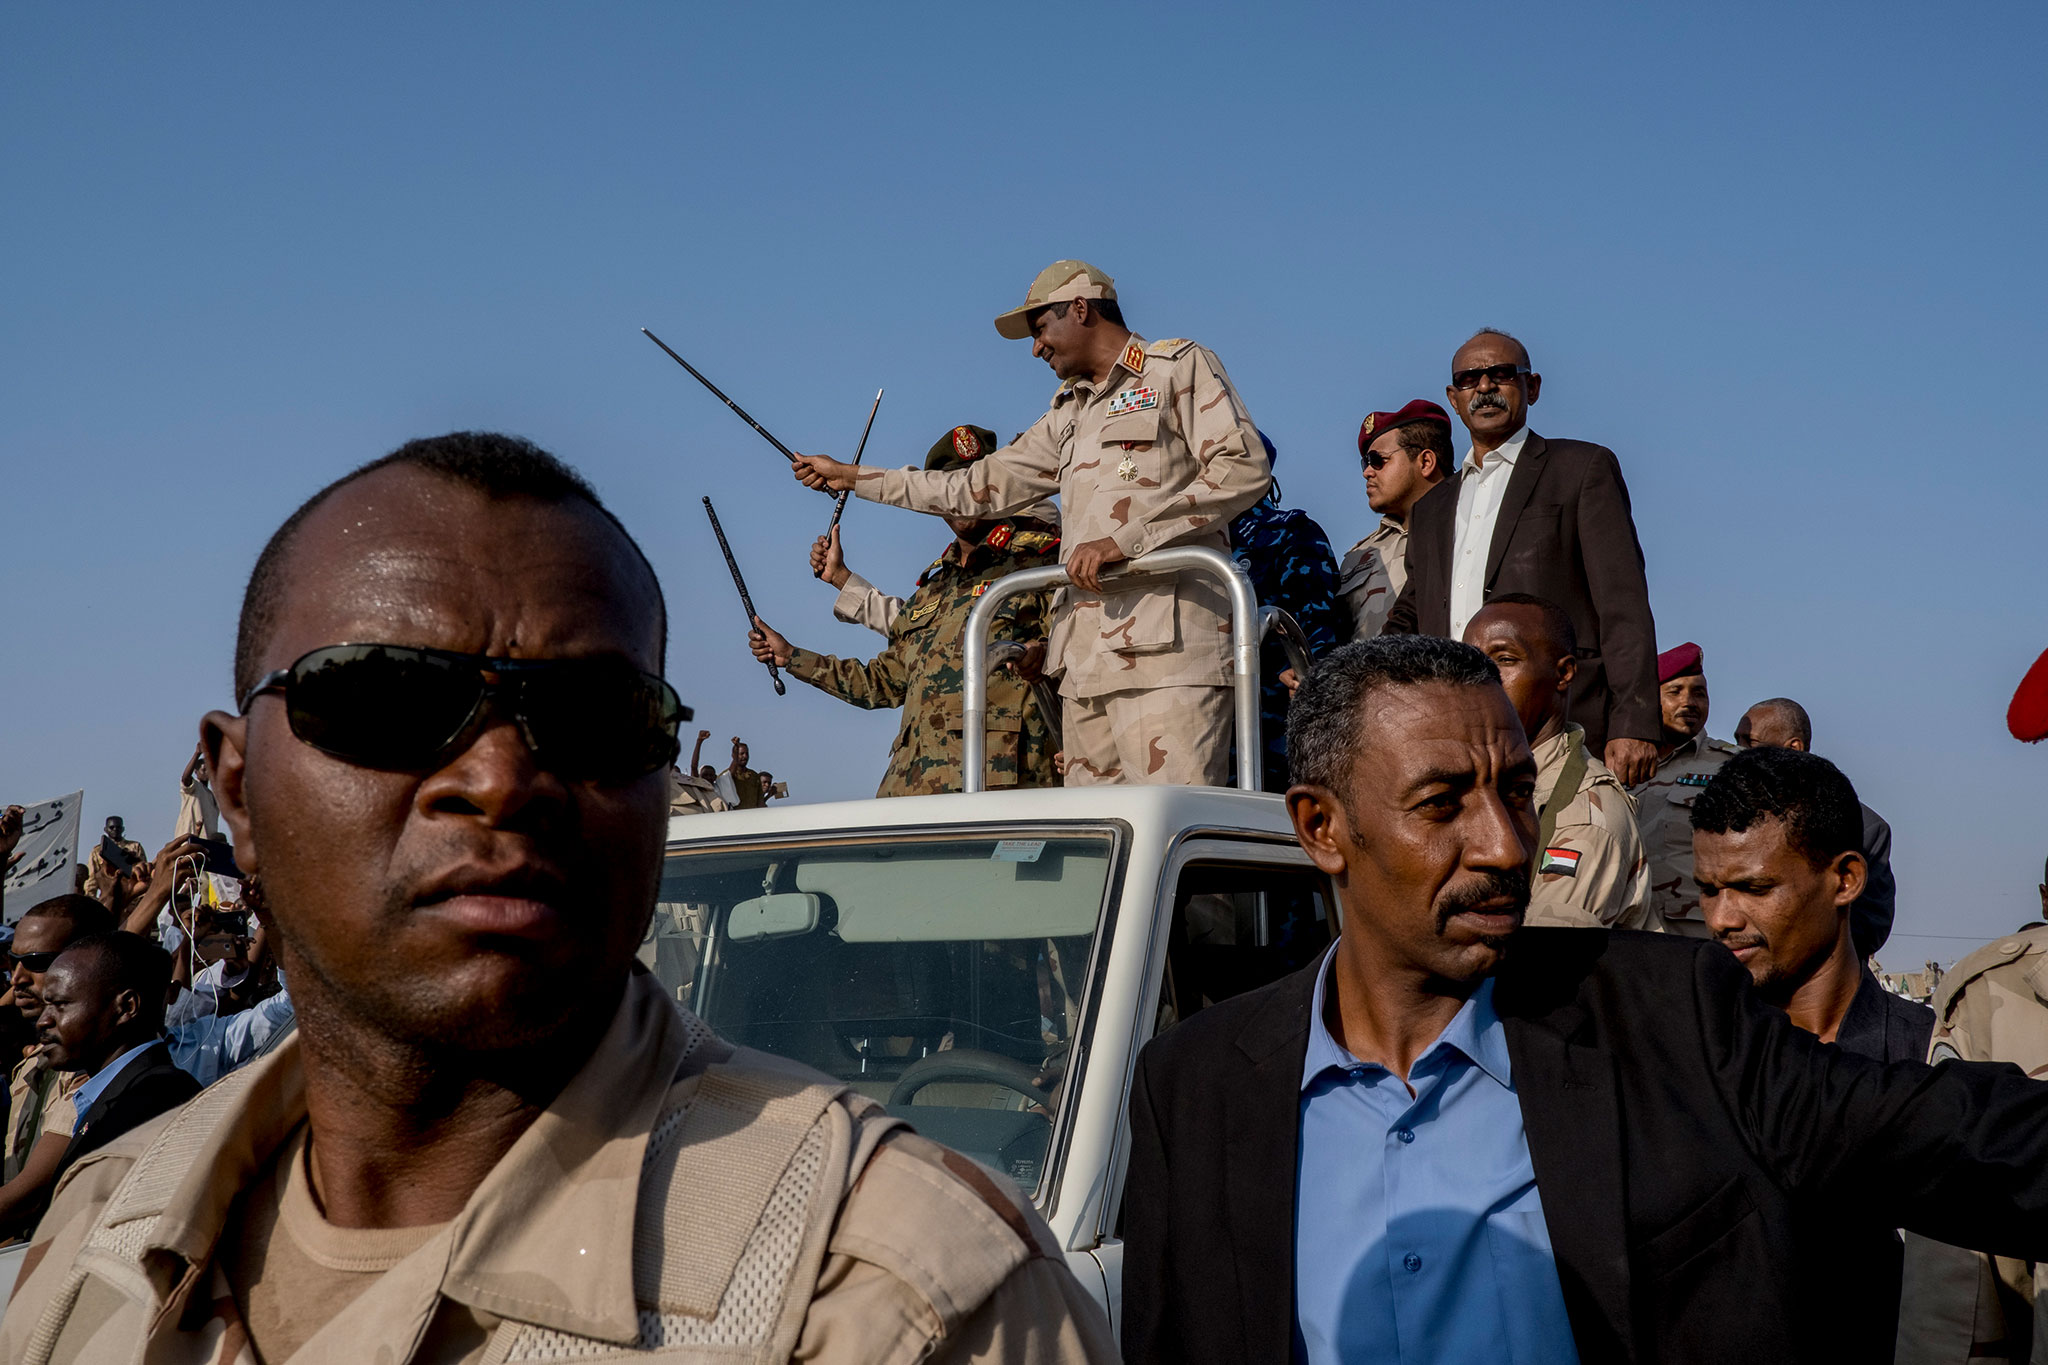 Lt. Gen. Mohamed Hamdan, center, also known as Hemeti, the de-facto ruler of Sudan, atop a truck during a rally in Galawee, Sudan, June 15, 2019.  (Declan Walsh/The New York Times)